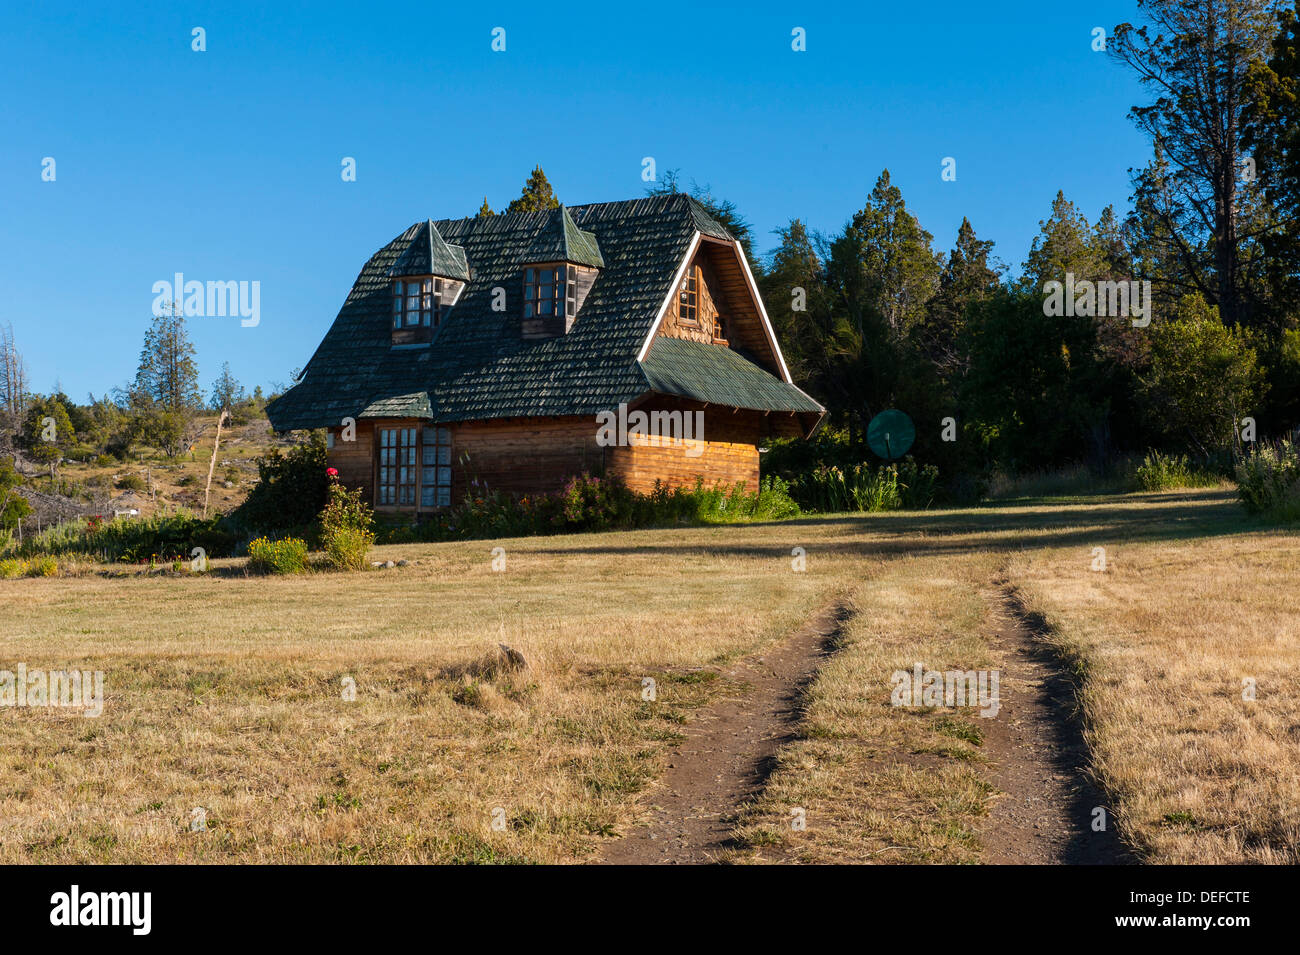 Welsh house, Chubut, Patagonia, Argentina, South America Stock Photo